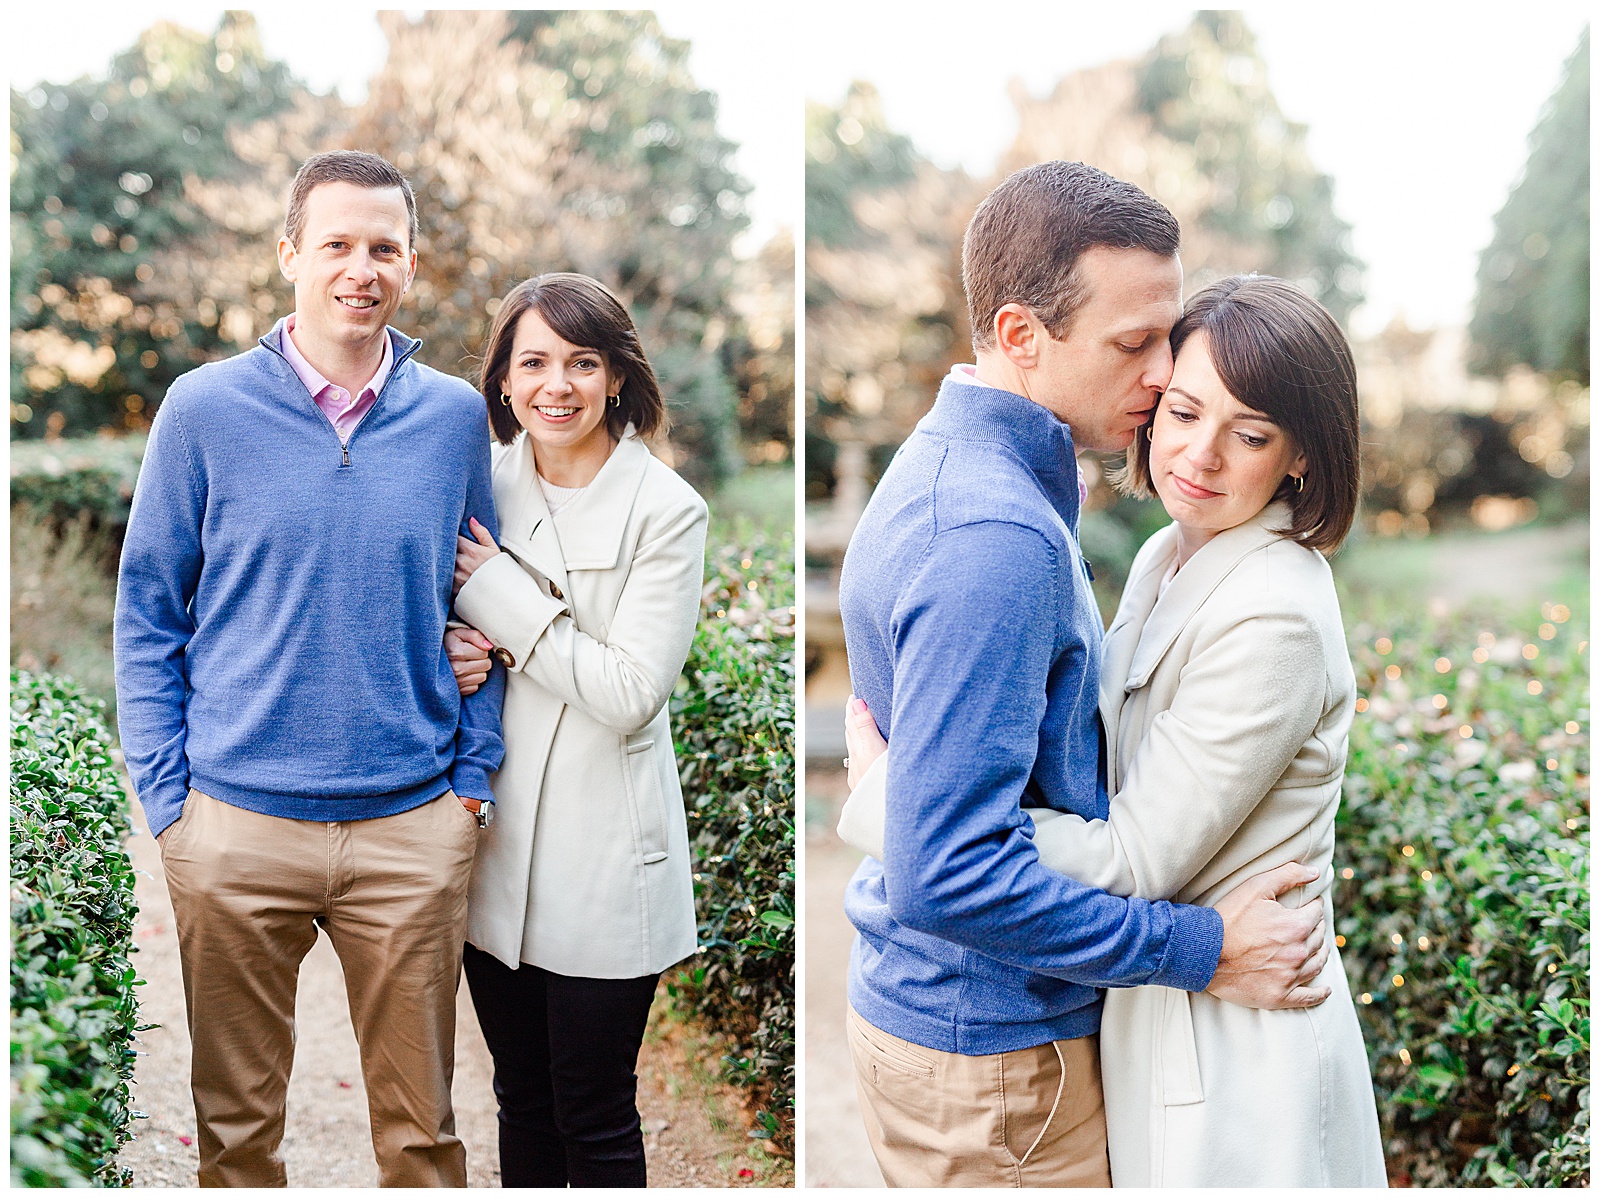 Sweet Couple Walking in Park for Outdoor Winter Engagement Session in NC - white coat, short brown hair bride outfit ideas